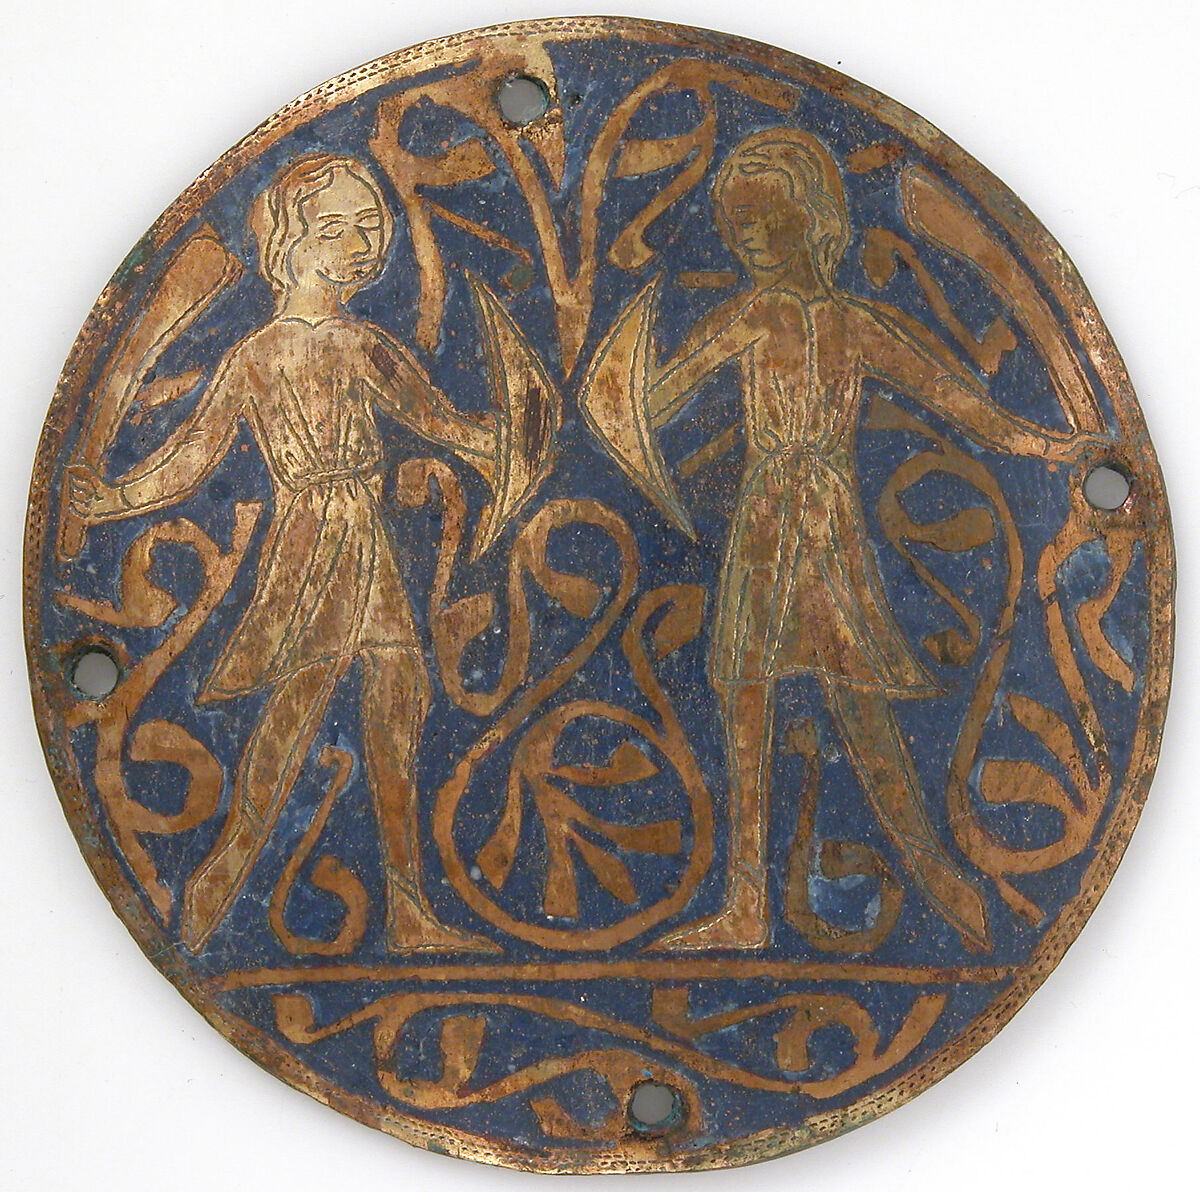 Medallion with Two Young Warriors with Falchions and Bucklers, Copper: engraved and gilt; champlevé enamel: medium and light blue and white, French 